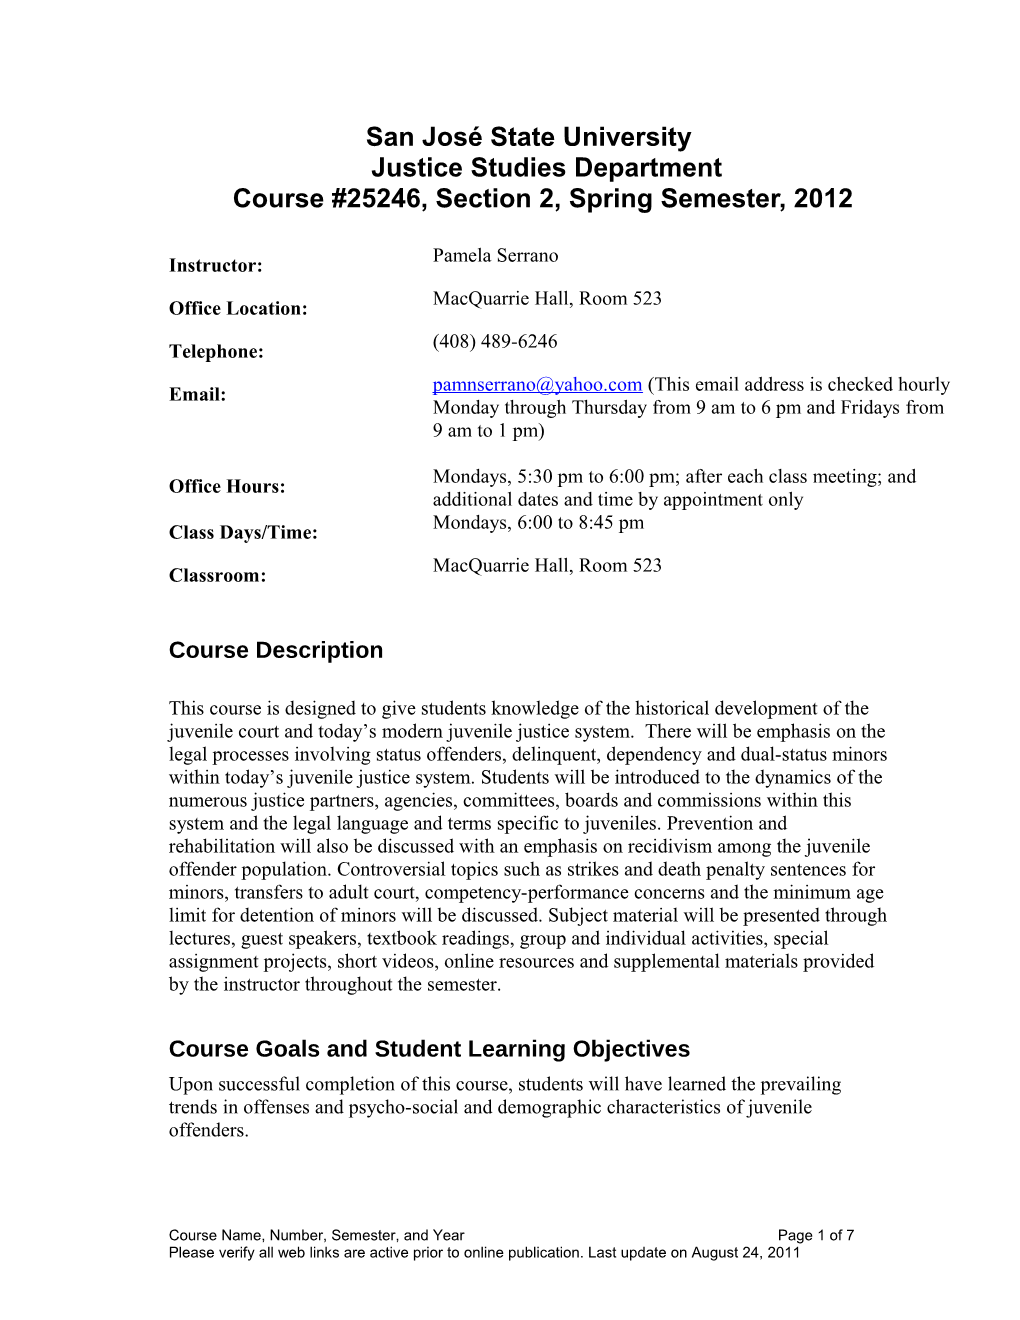 Accessible Syllabus Template s1